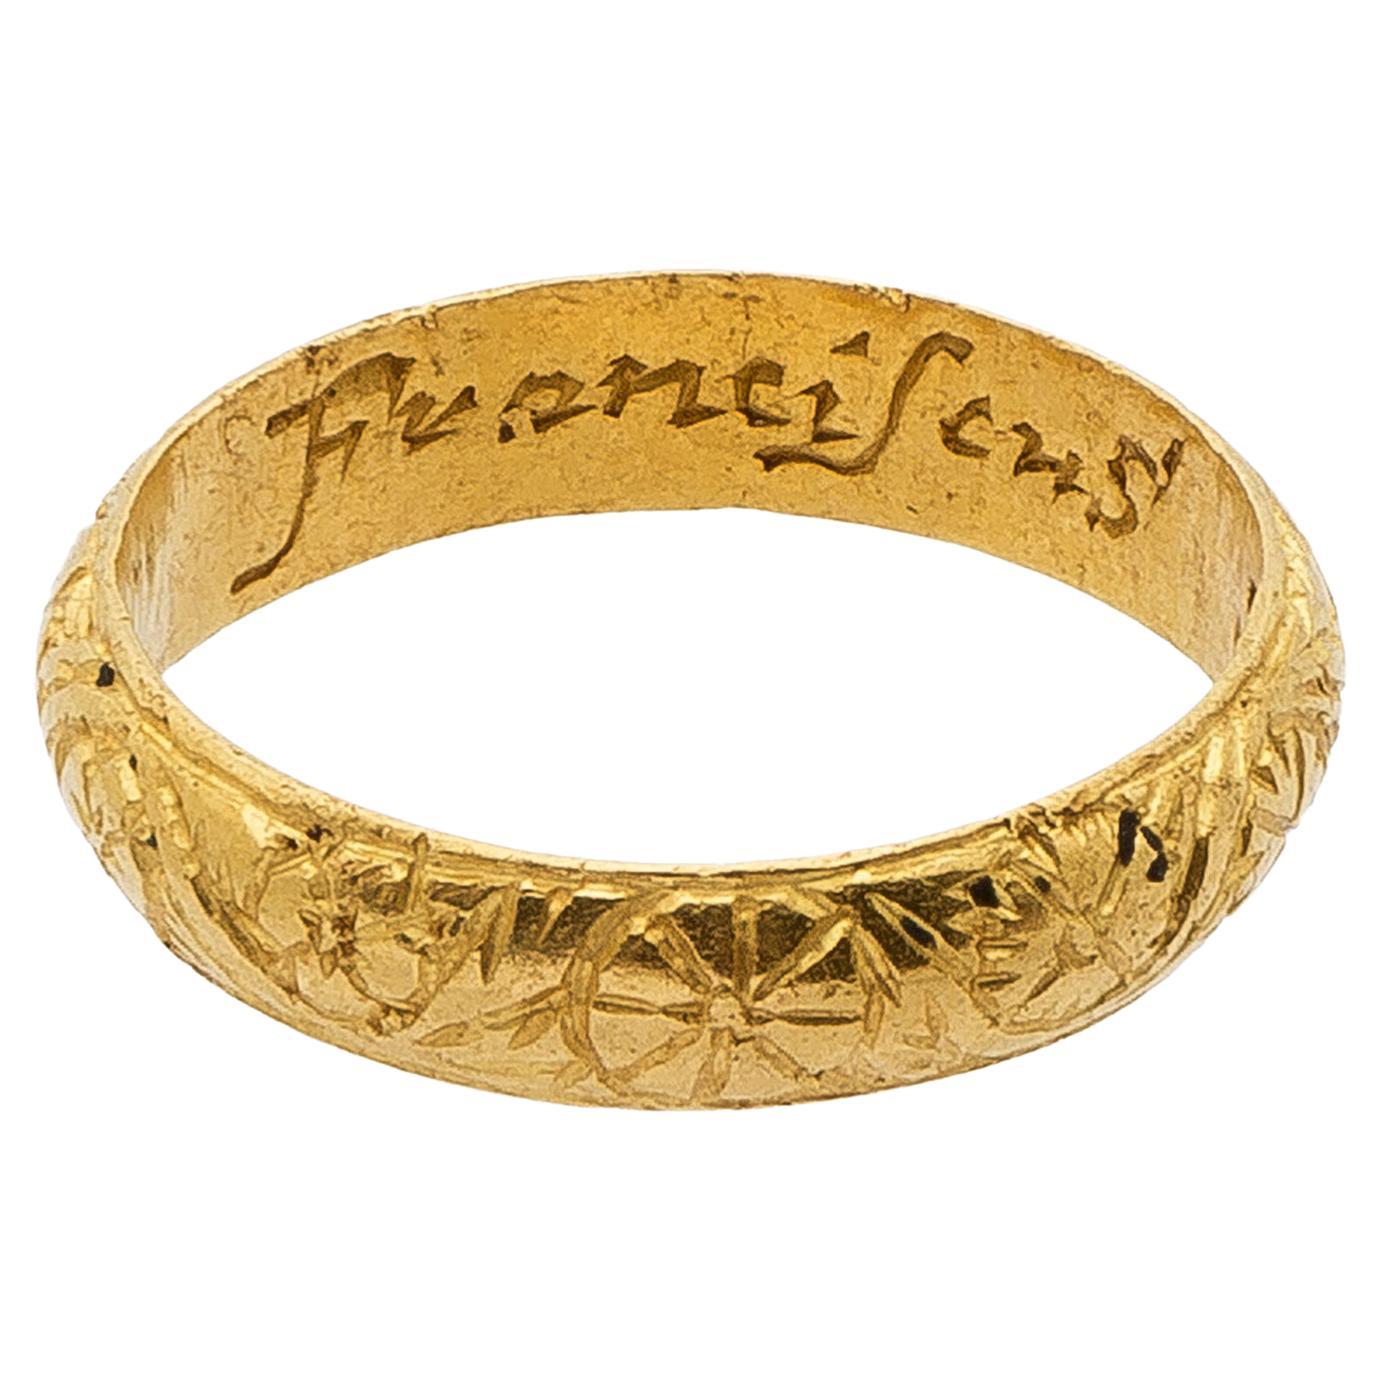 Antique Gold English "Posy" Band Ring